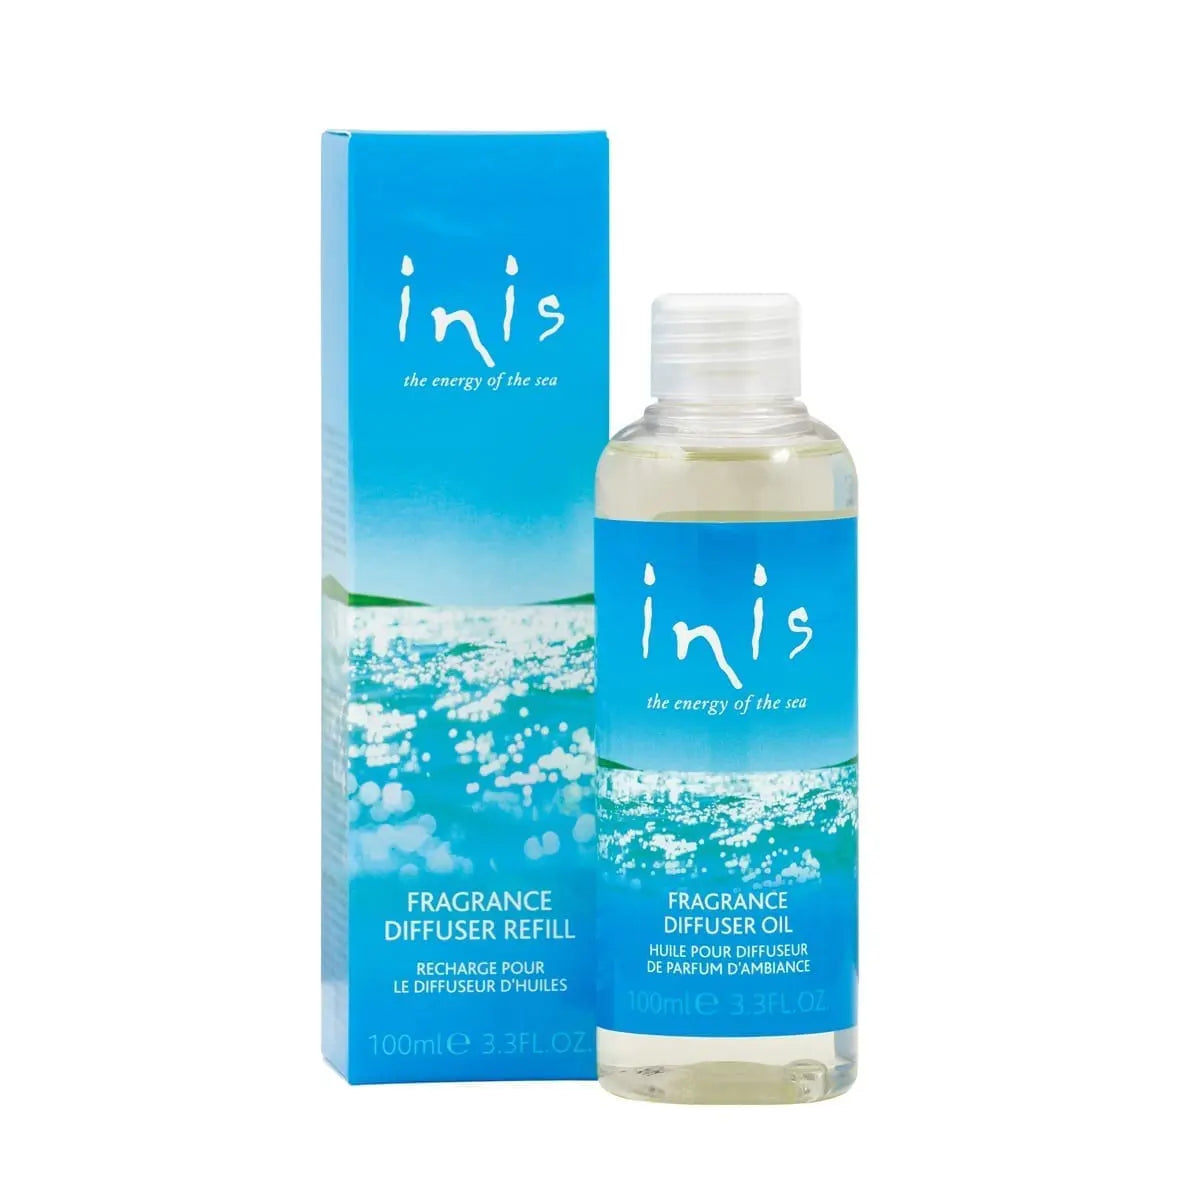 Inis Energy of the Sea - Diffuser Refill 3.3 fl. oz.